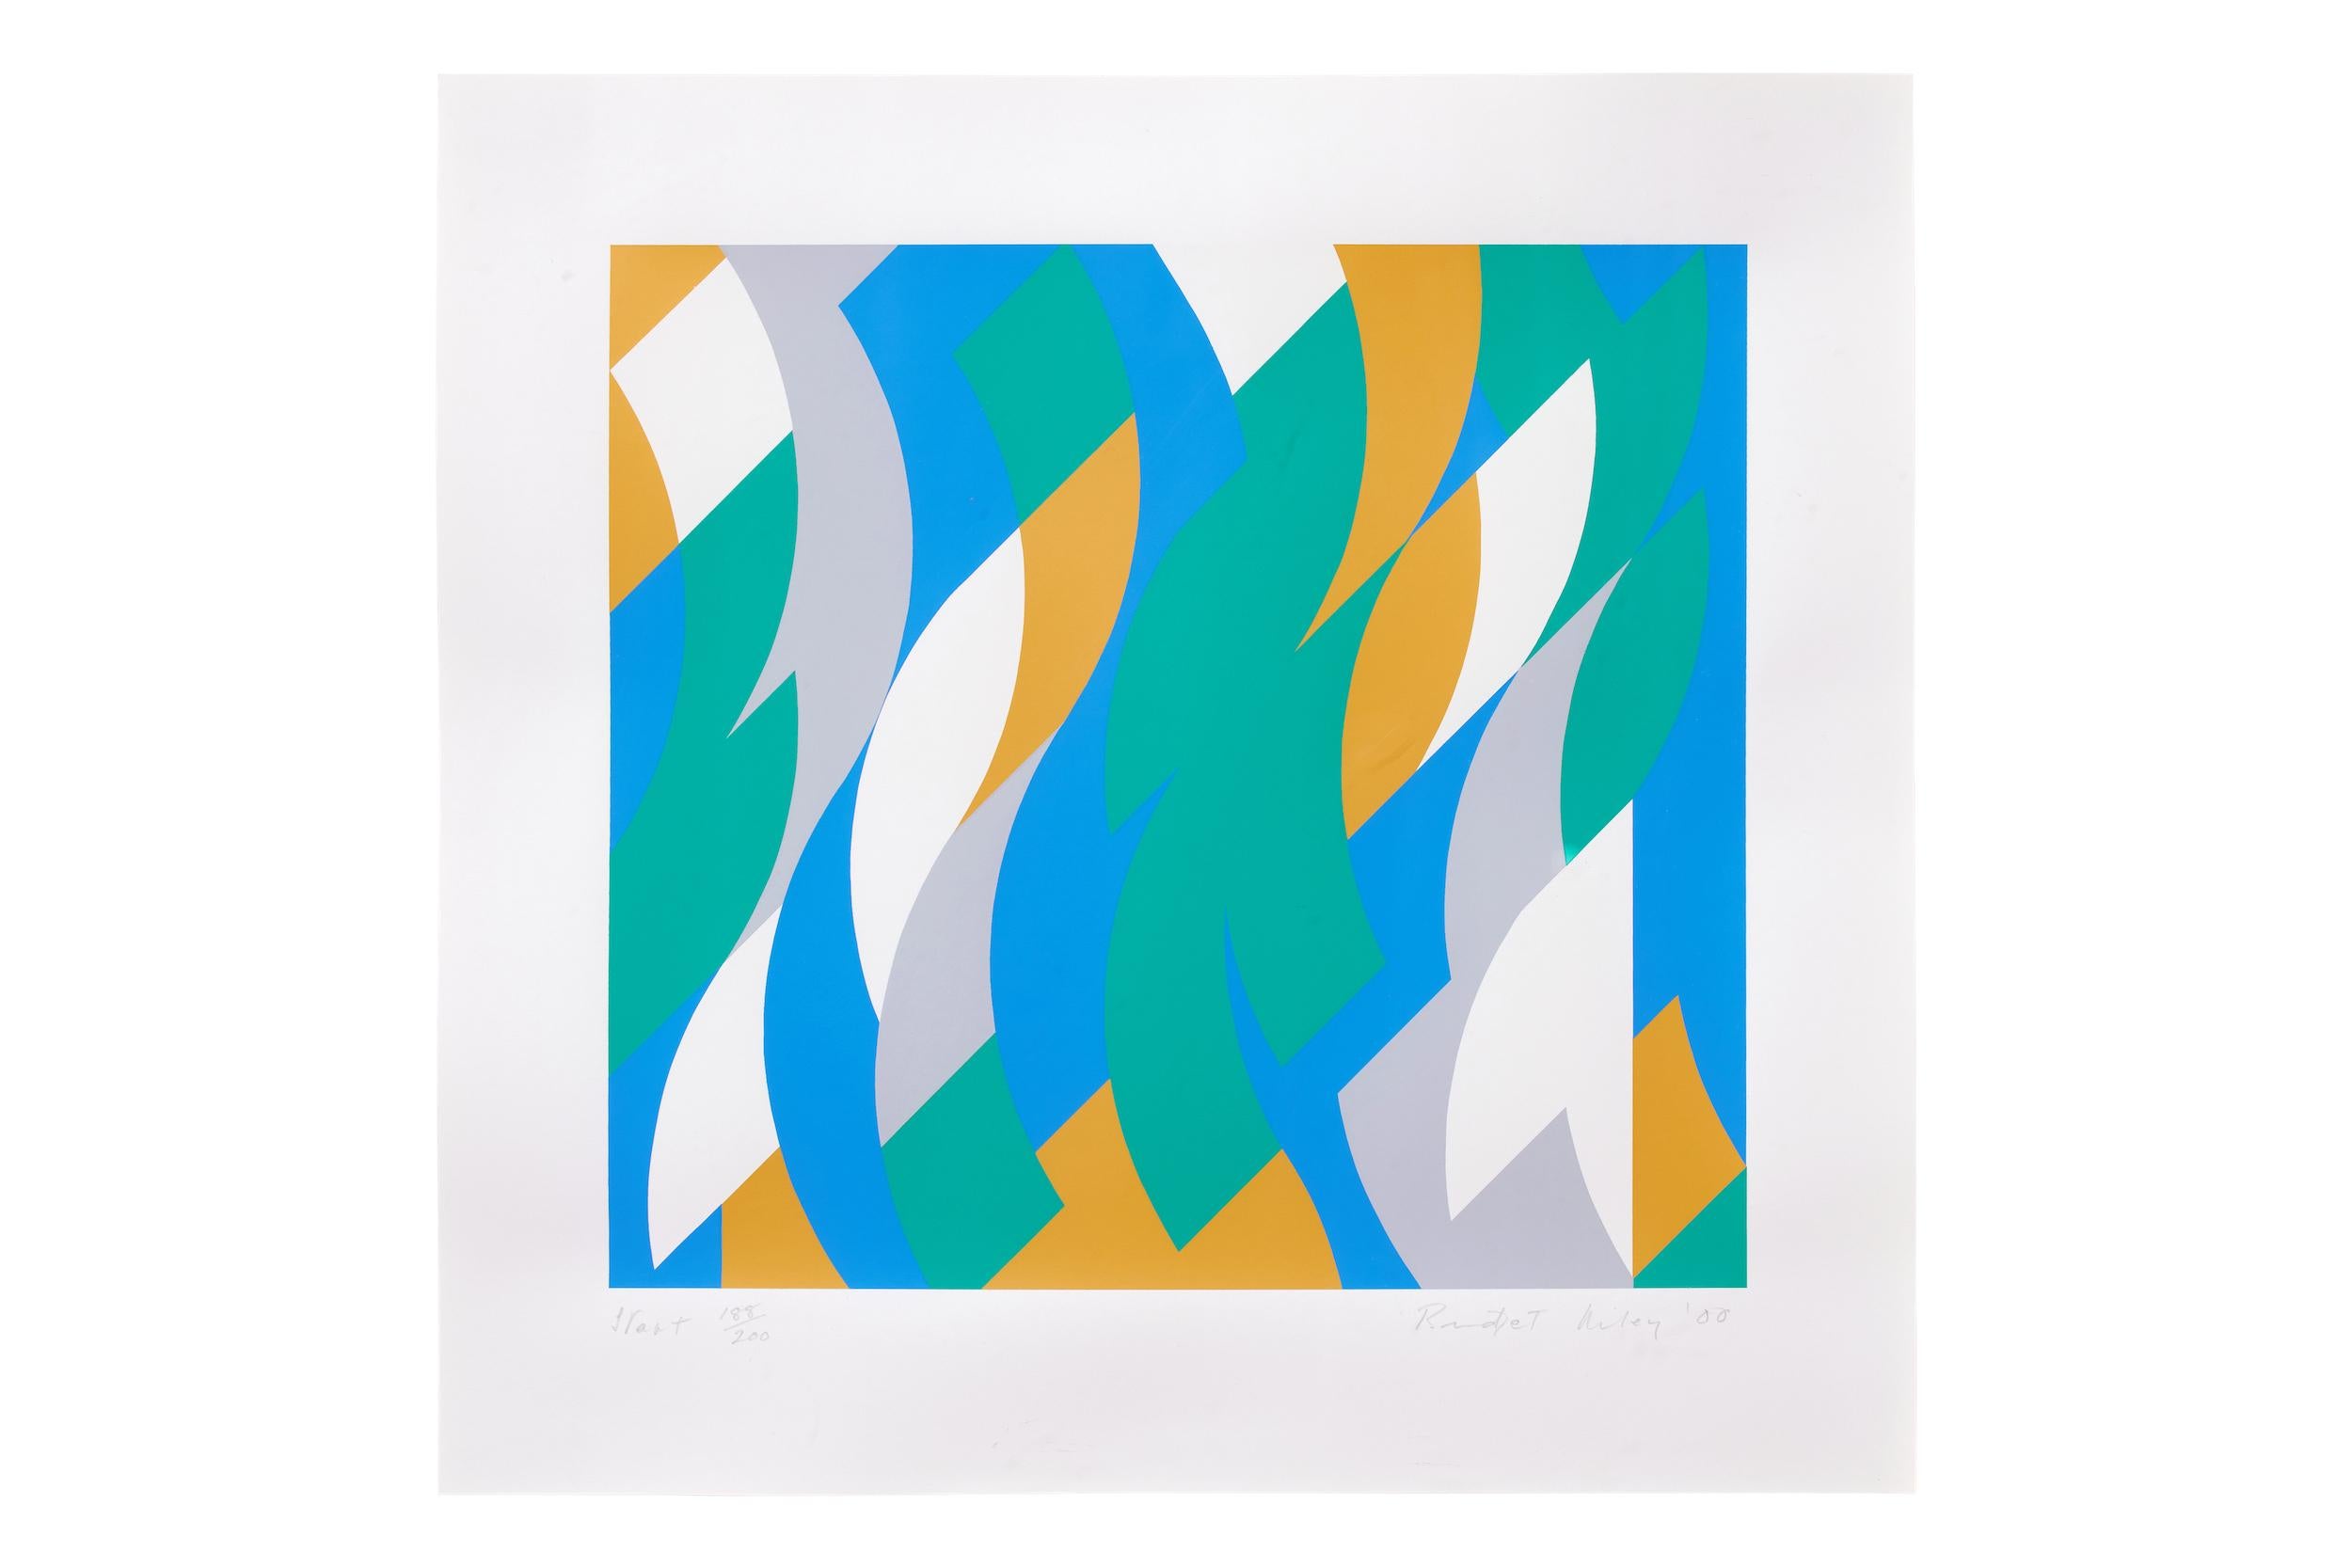 Start, 2000
Bridget Riley

Screenprint in colours, on paper
Signed, titled, dated and numbered from the edition of 200
Printed by Artizan Editions, Hove
Image: 34.8 × 38 cm (13.7 × 15 in)
Sheet: 47.5 × 49.4 cm (18.7 × 19.5 in)
Literature: Schubert